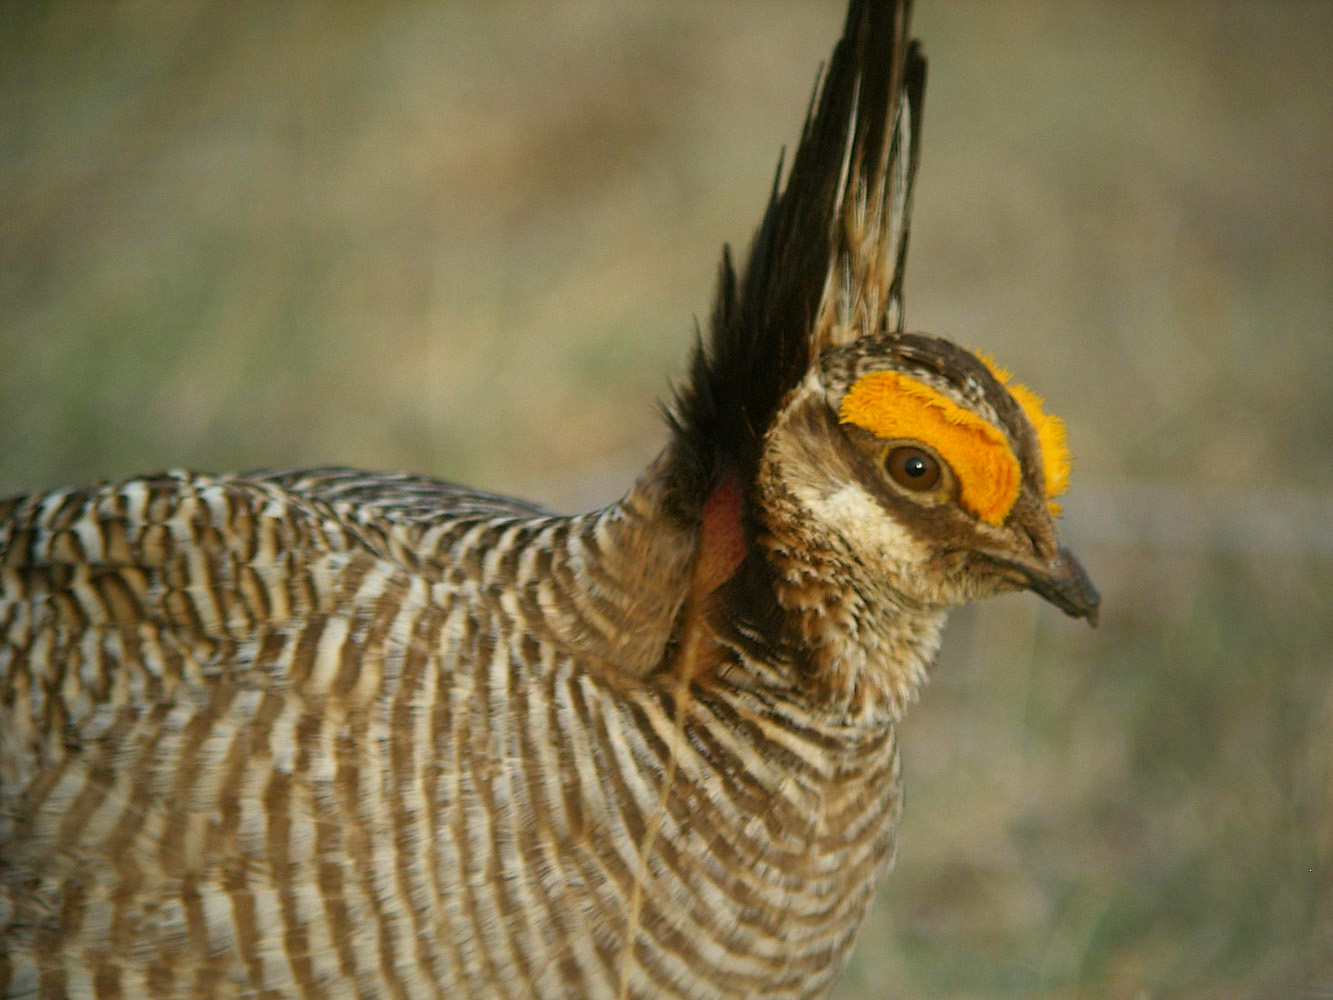 The Economic Well Being of Northwest Oklahoma at Stake in Efforts to Keep Lesser Prairie Chicken Off Endangered Species List